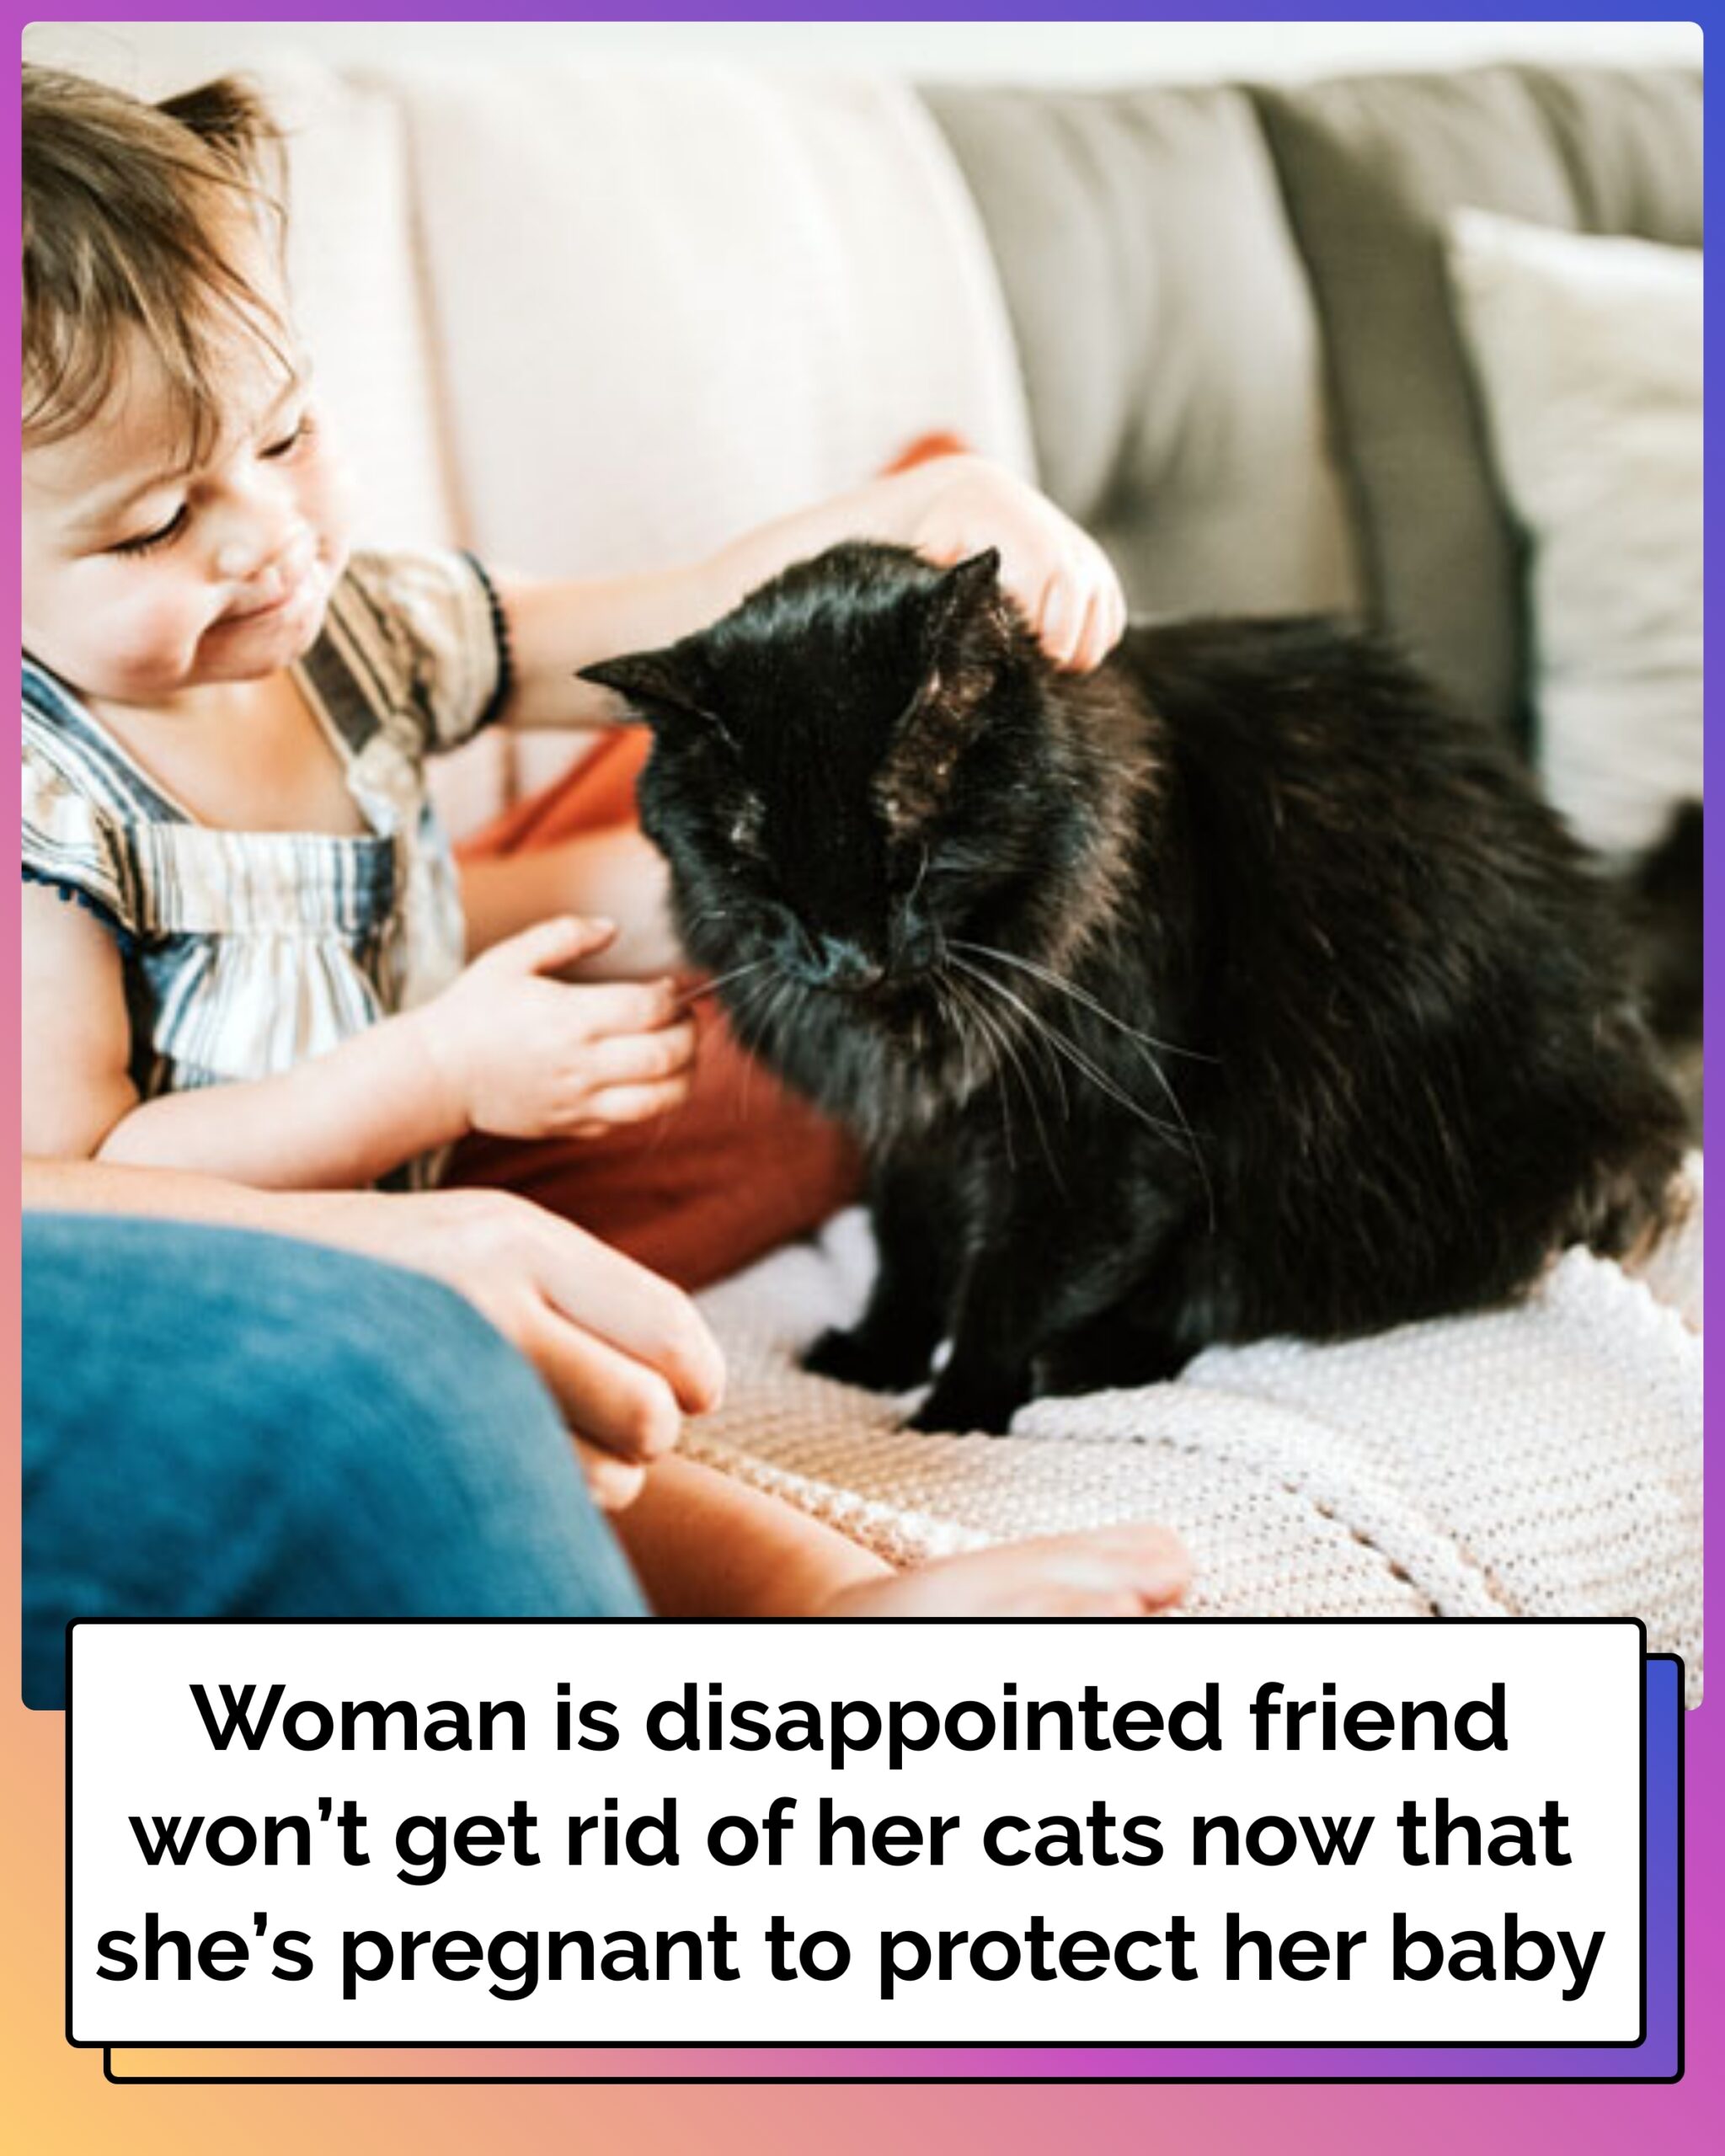 Expecting Mom Resolutely Keeps Her Cats Despite Friend’s Strong Disapproval